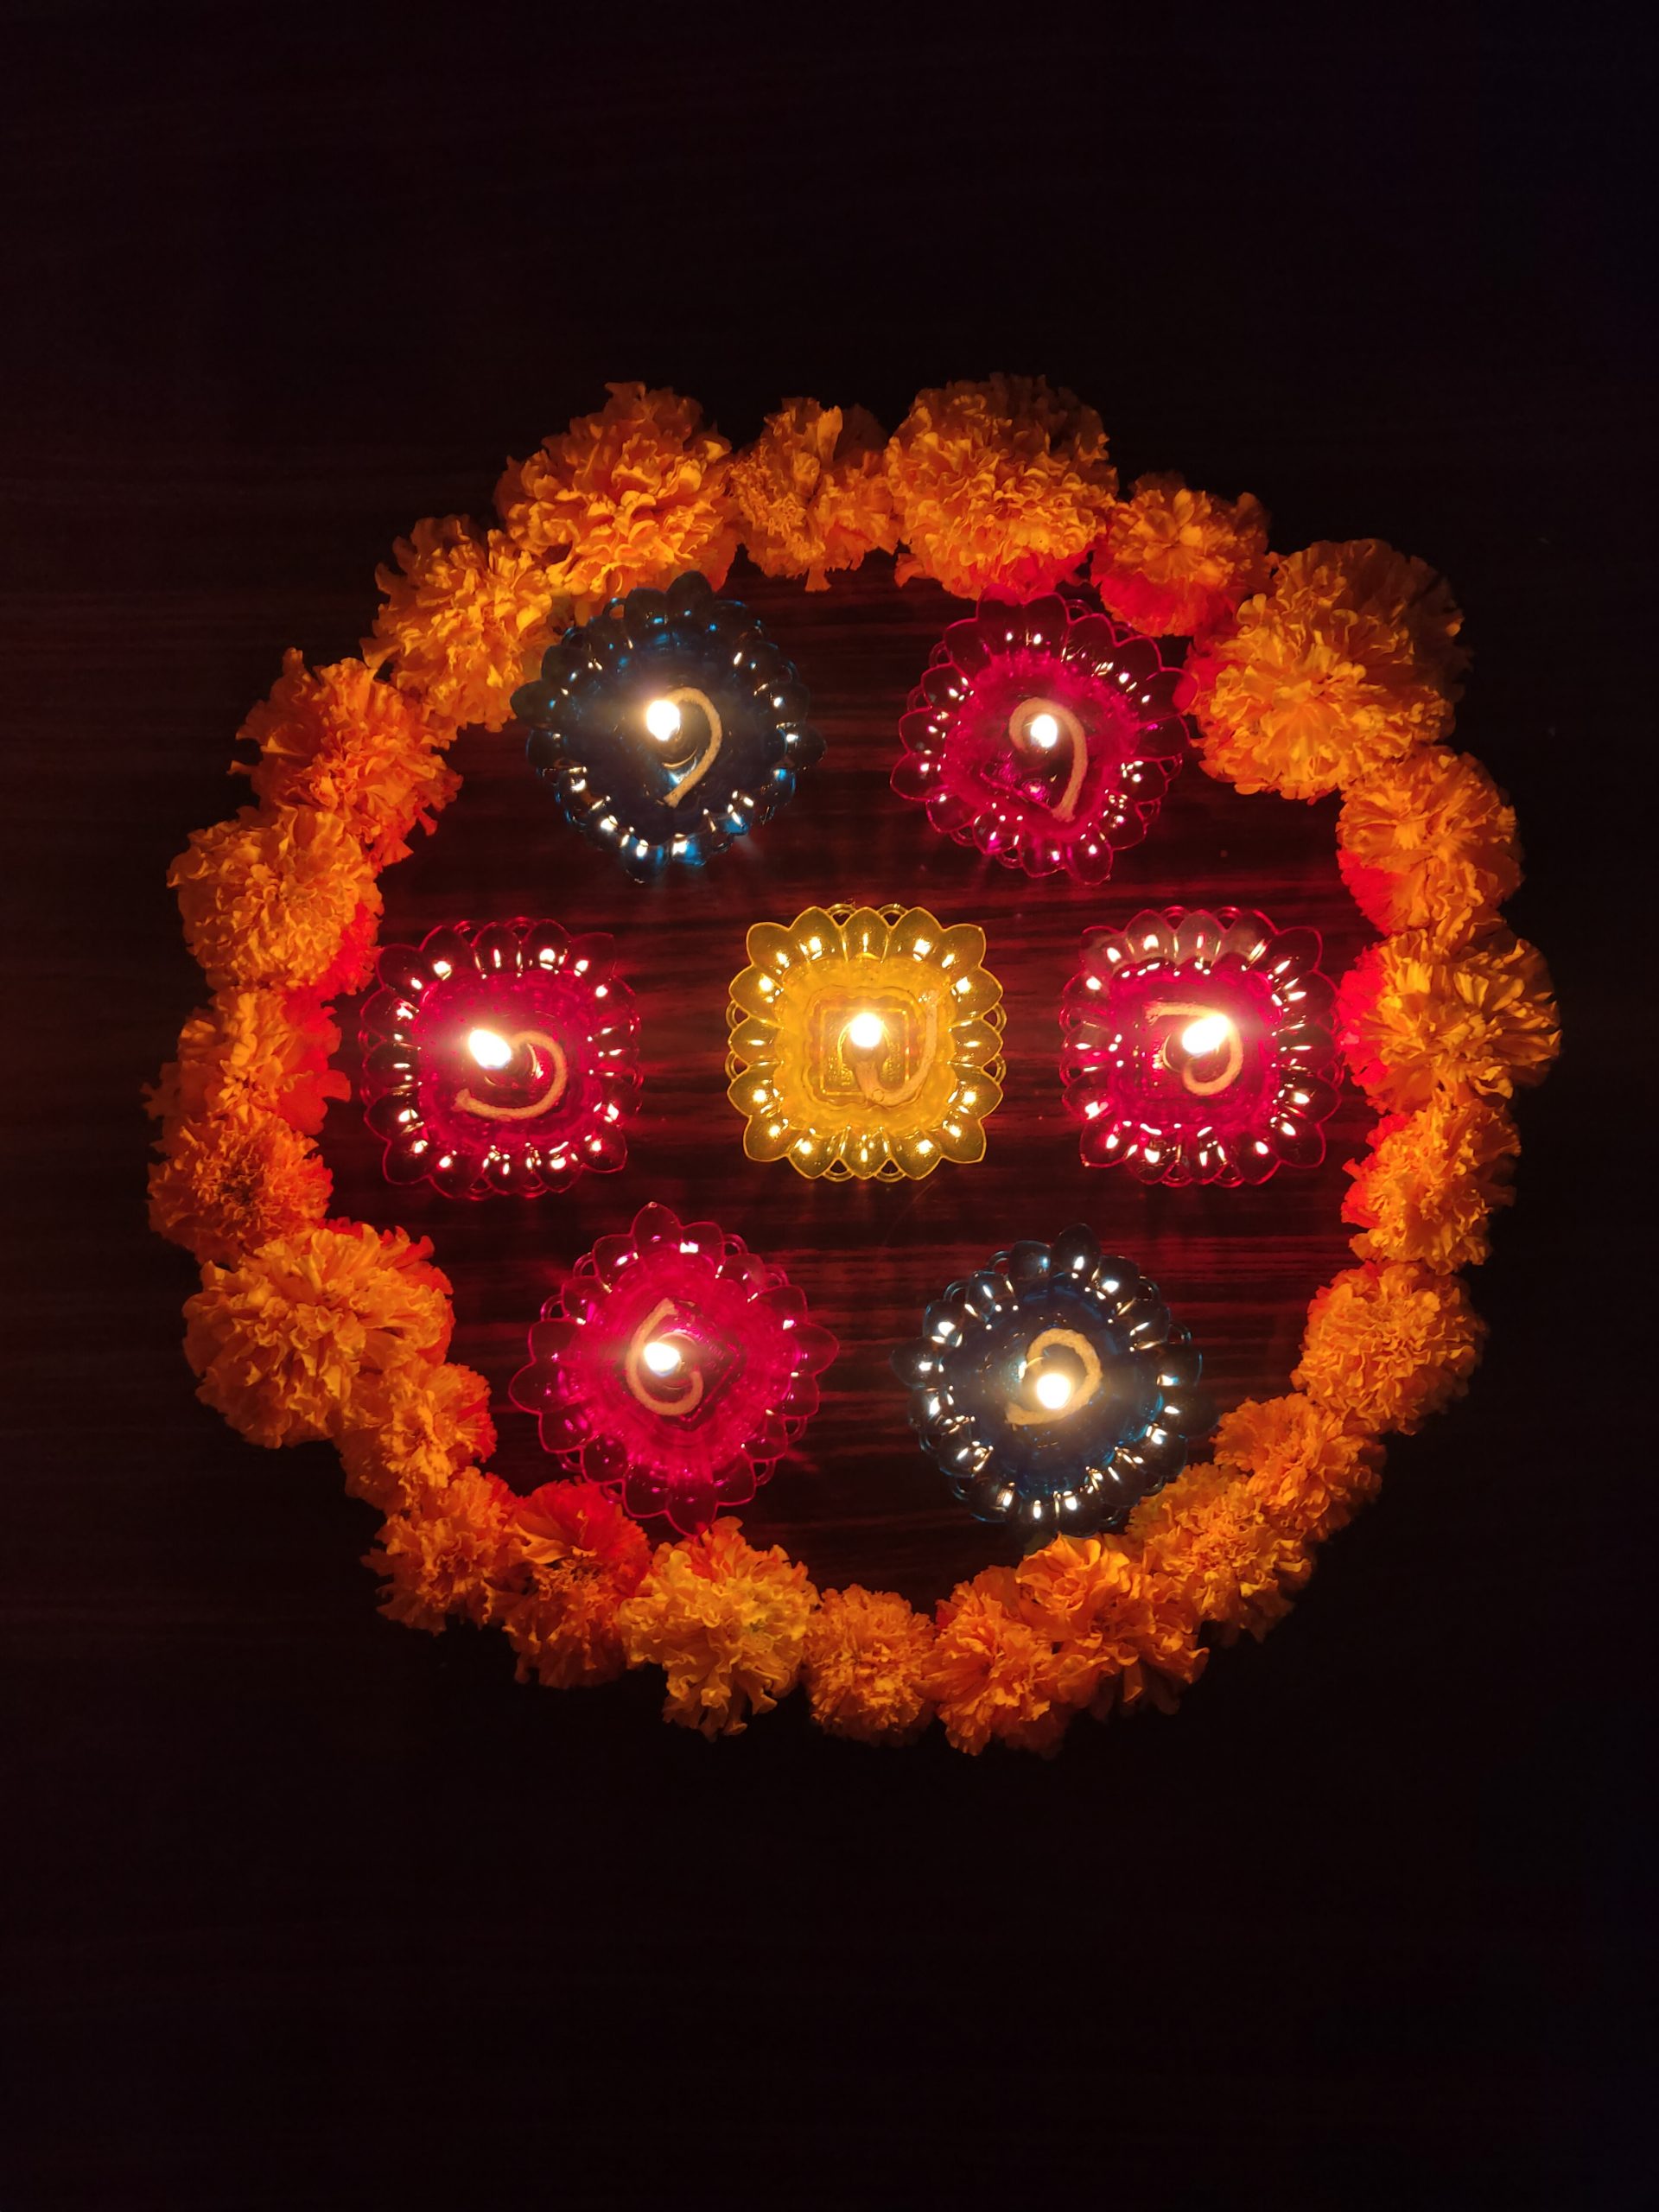 A design make with flowers and oil lamps